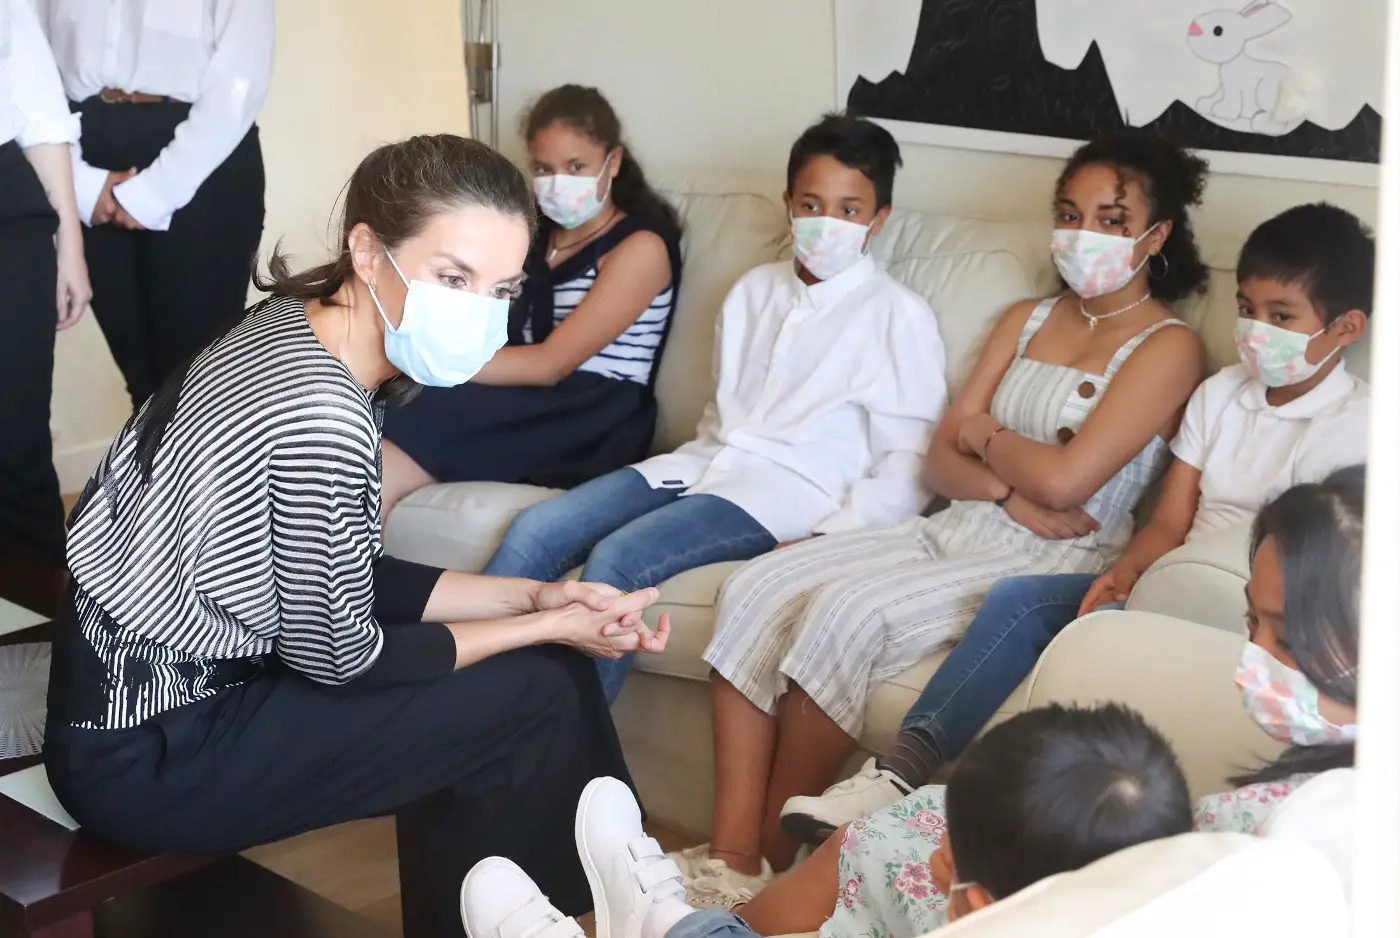 Queen Letizia of Spain met with the young kids during a visit to the SOS Children Village